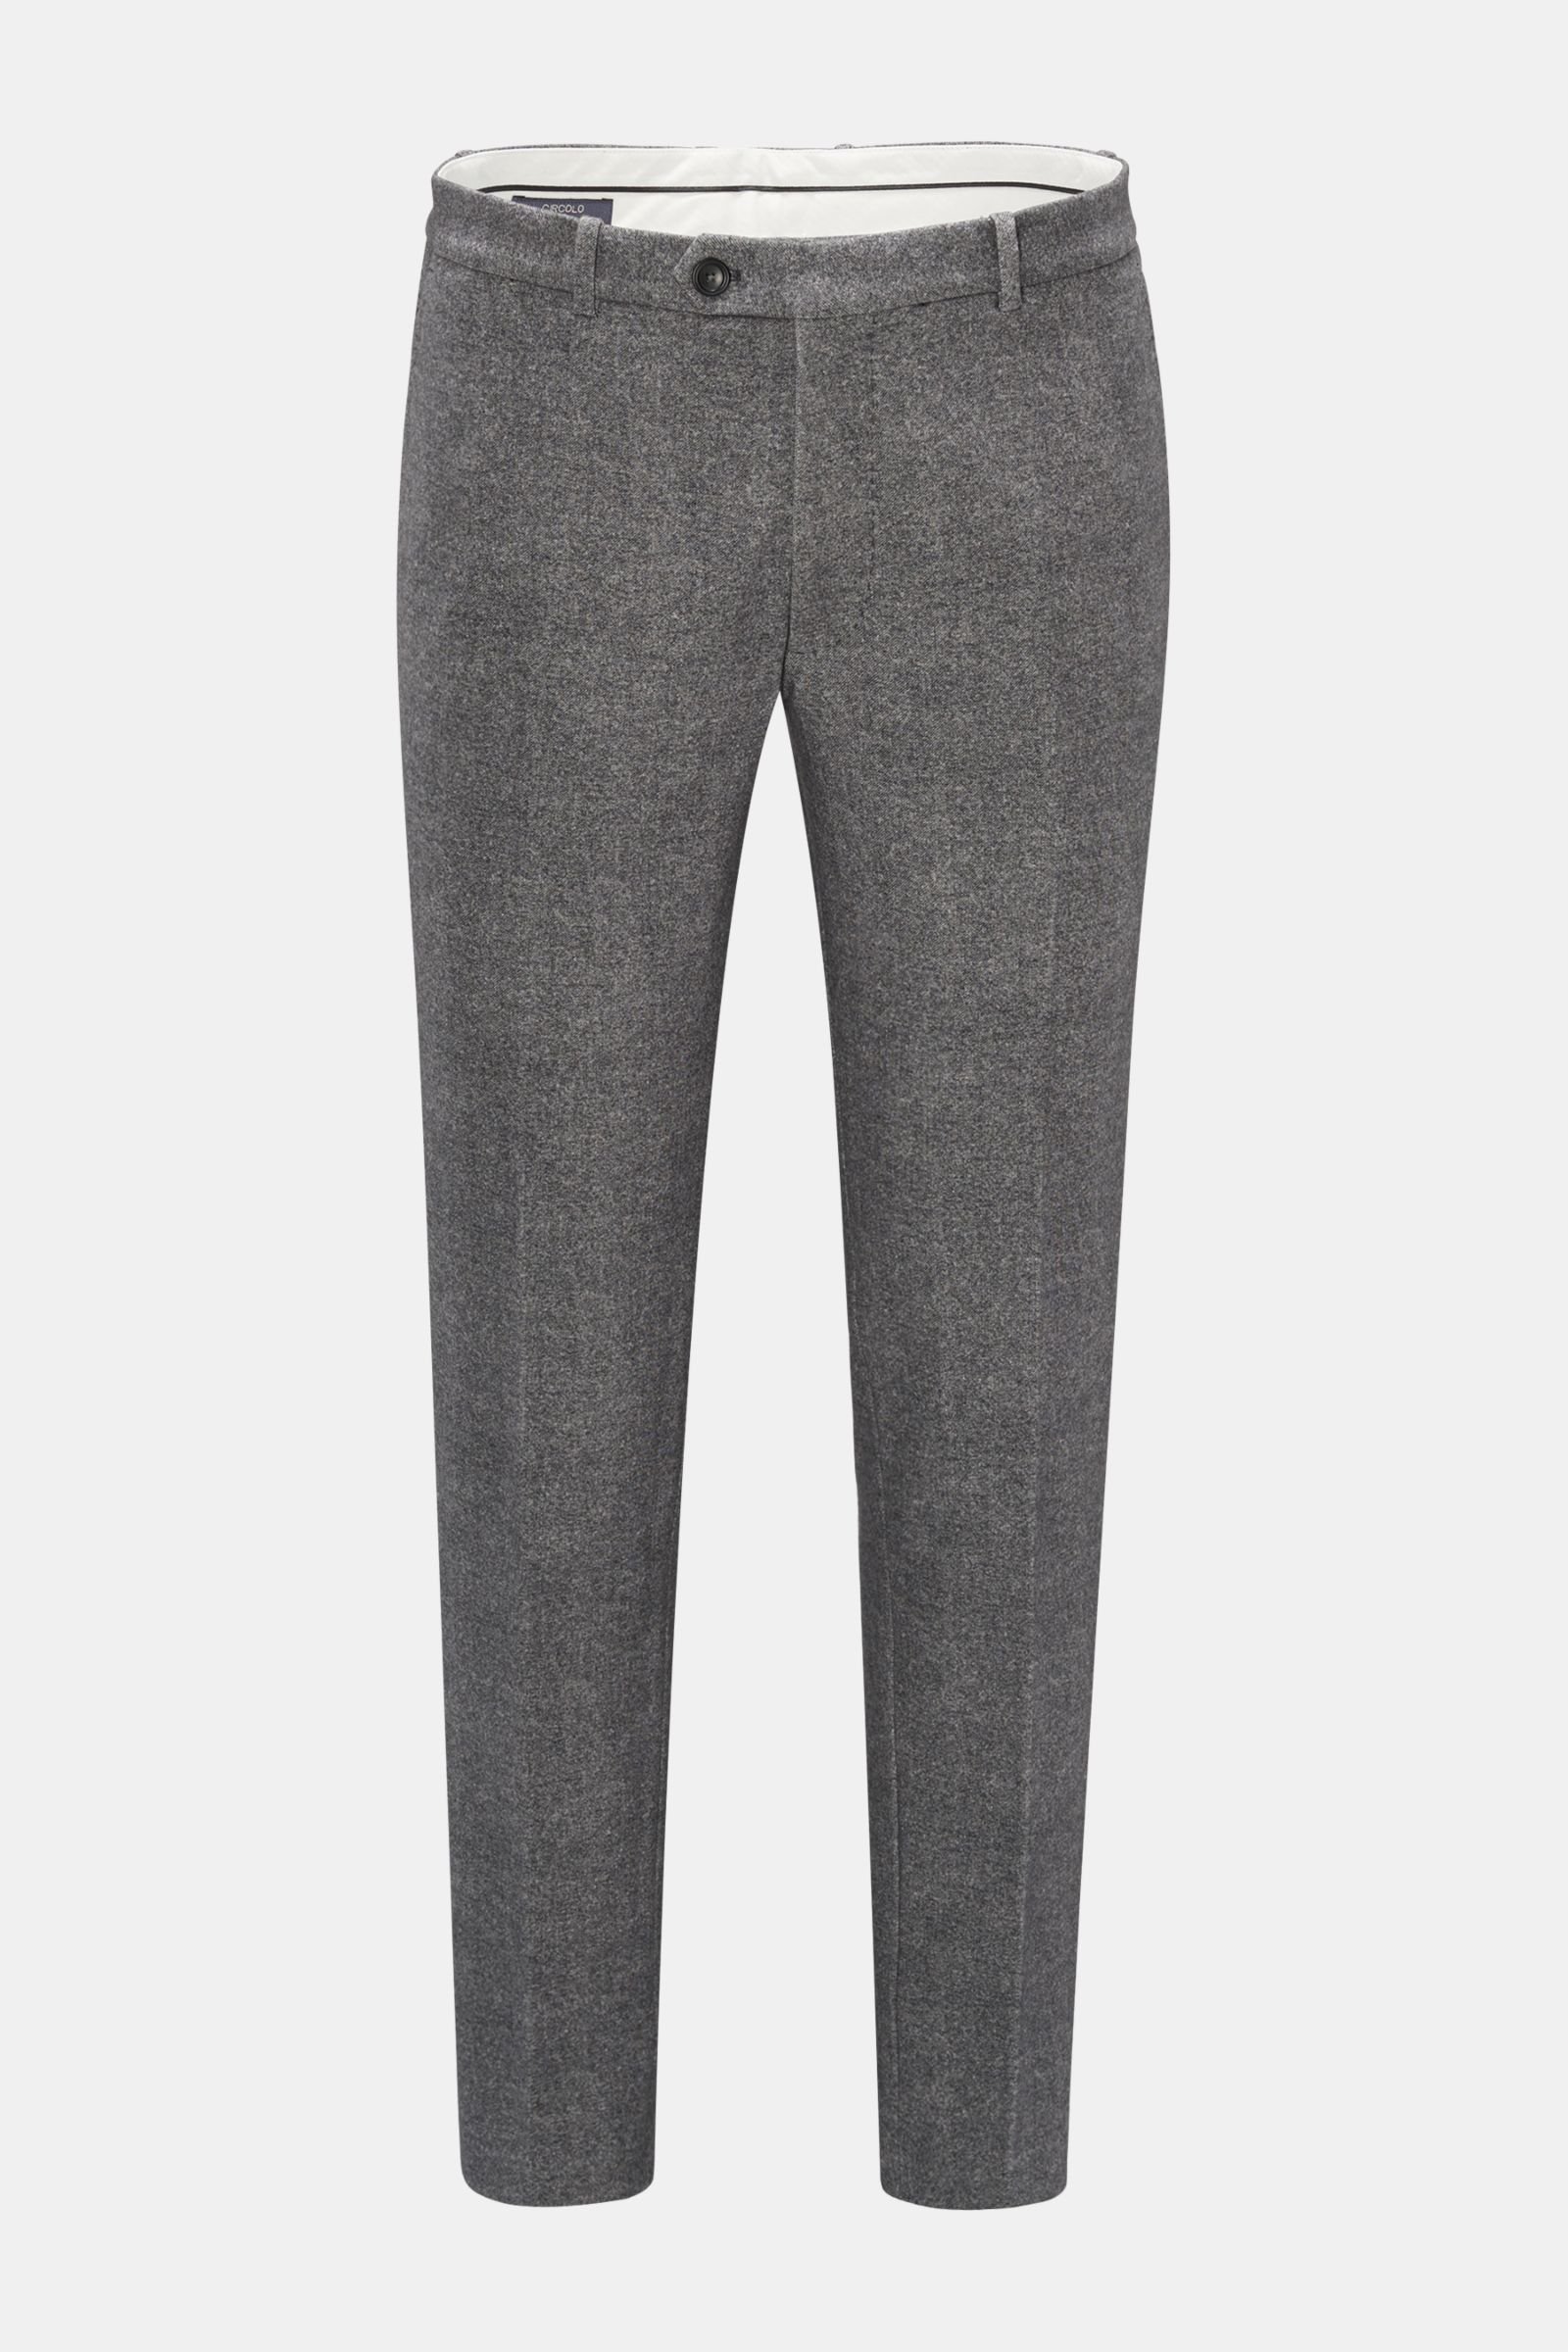 Jersey trousers grey